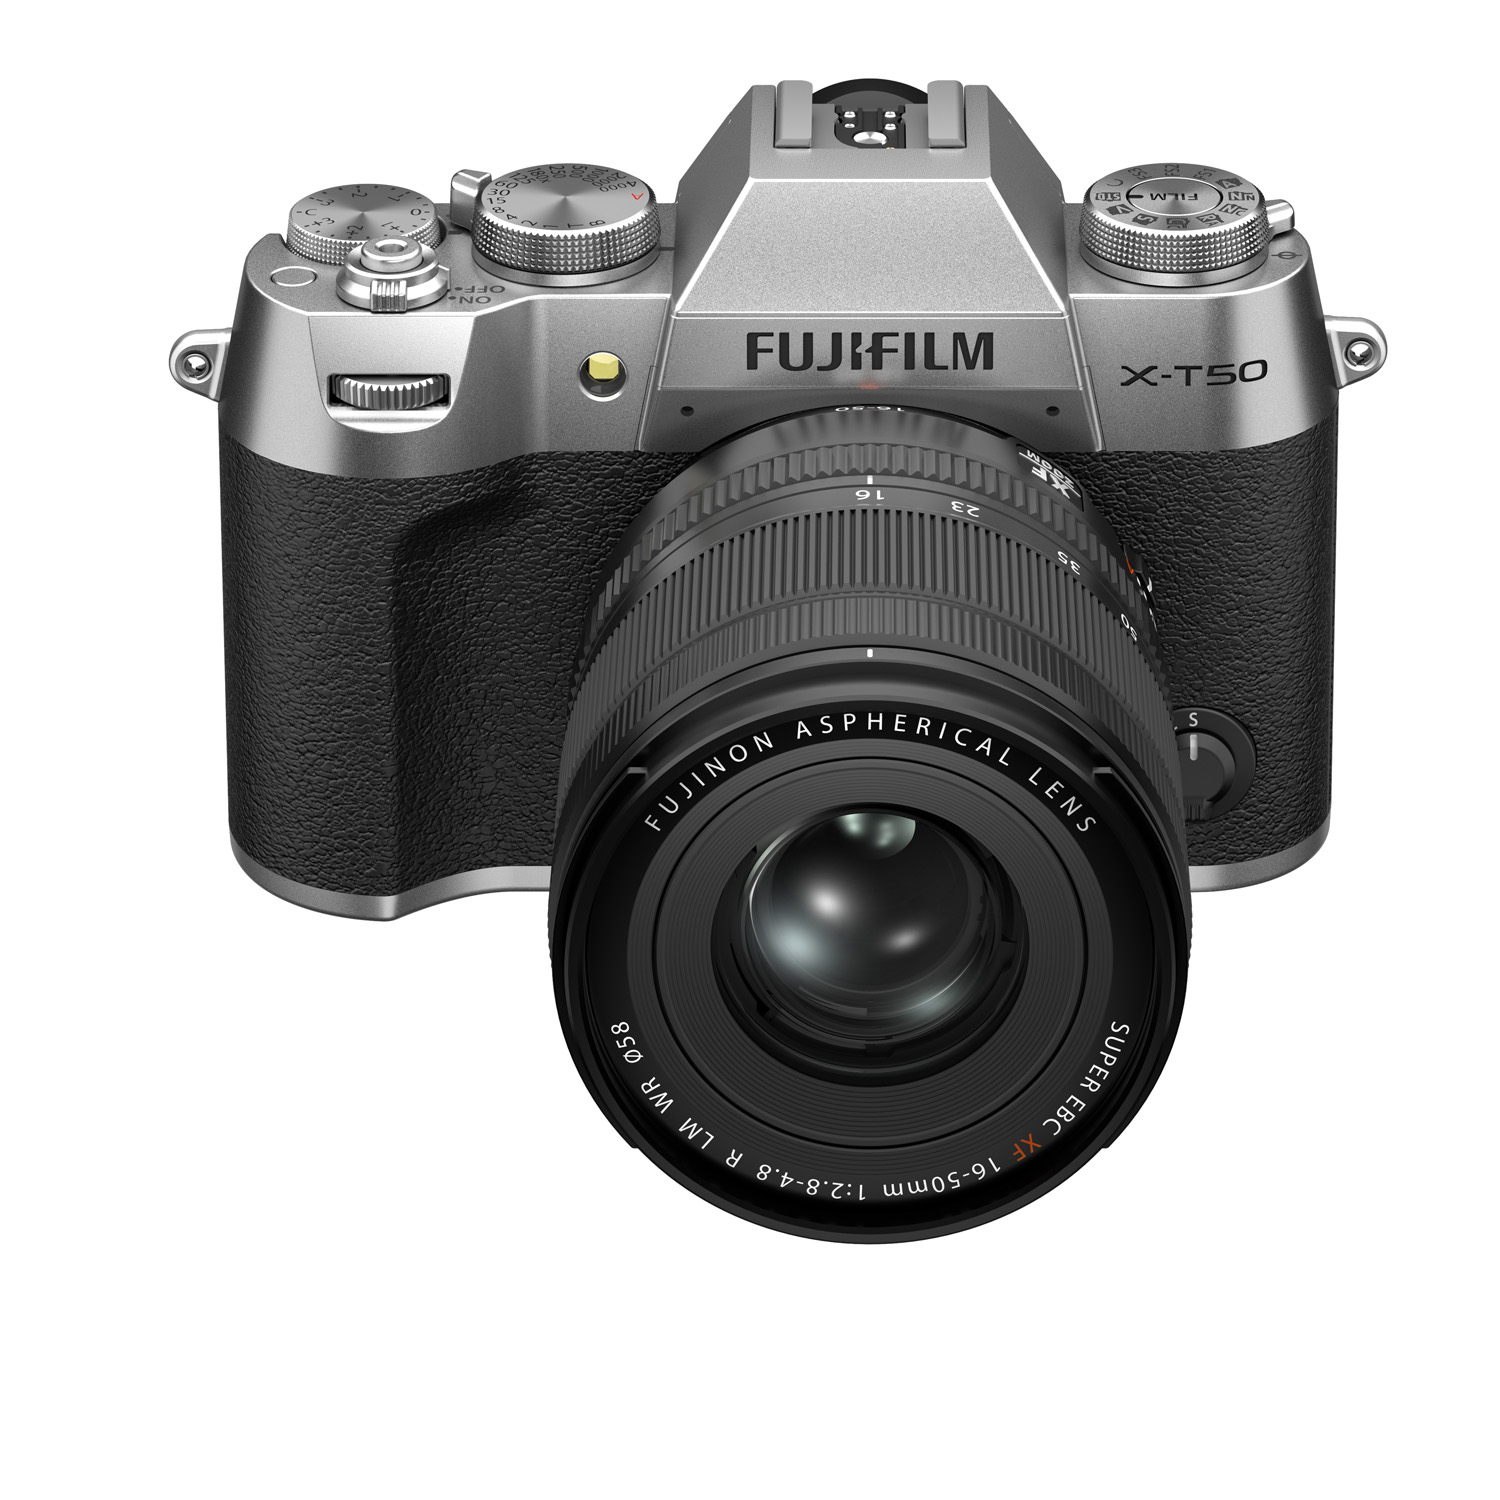 Product shot of Fujifilm X-T50 camera on white background front view